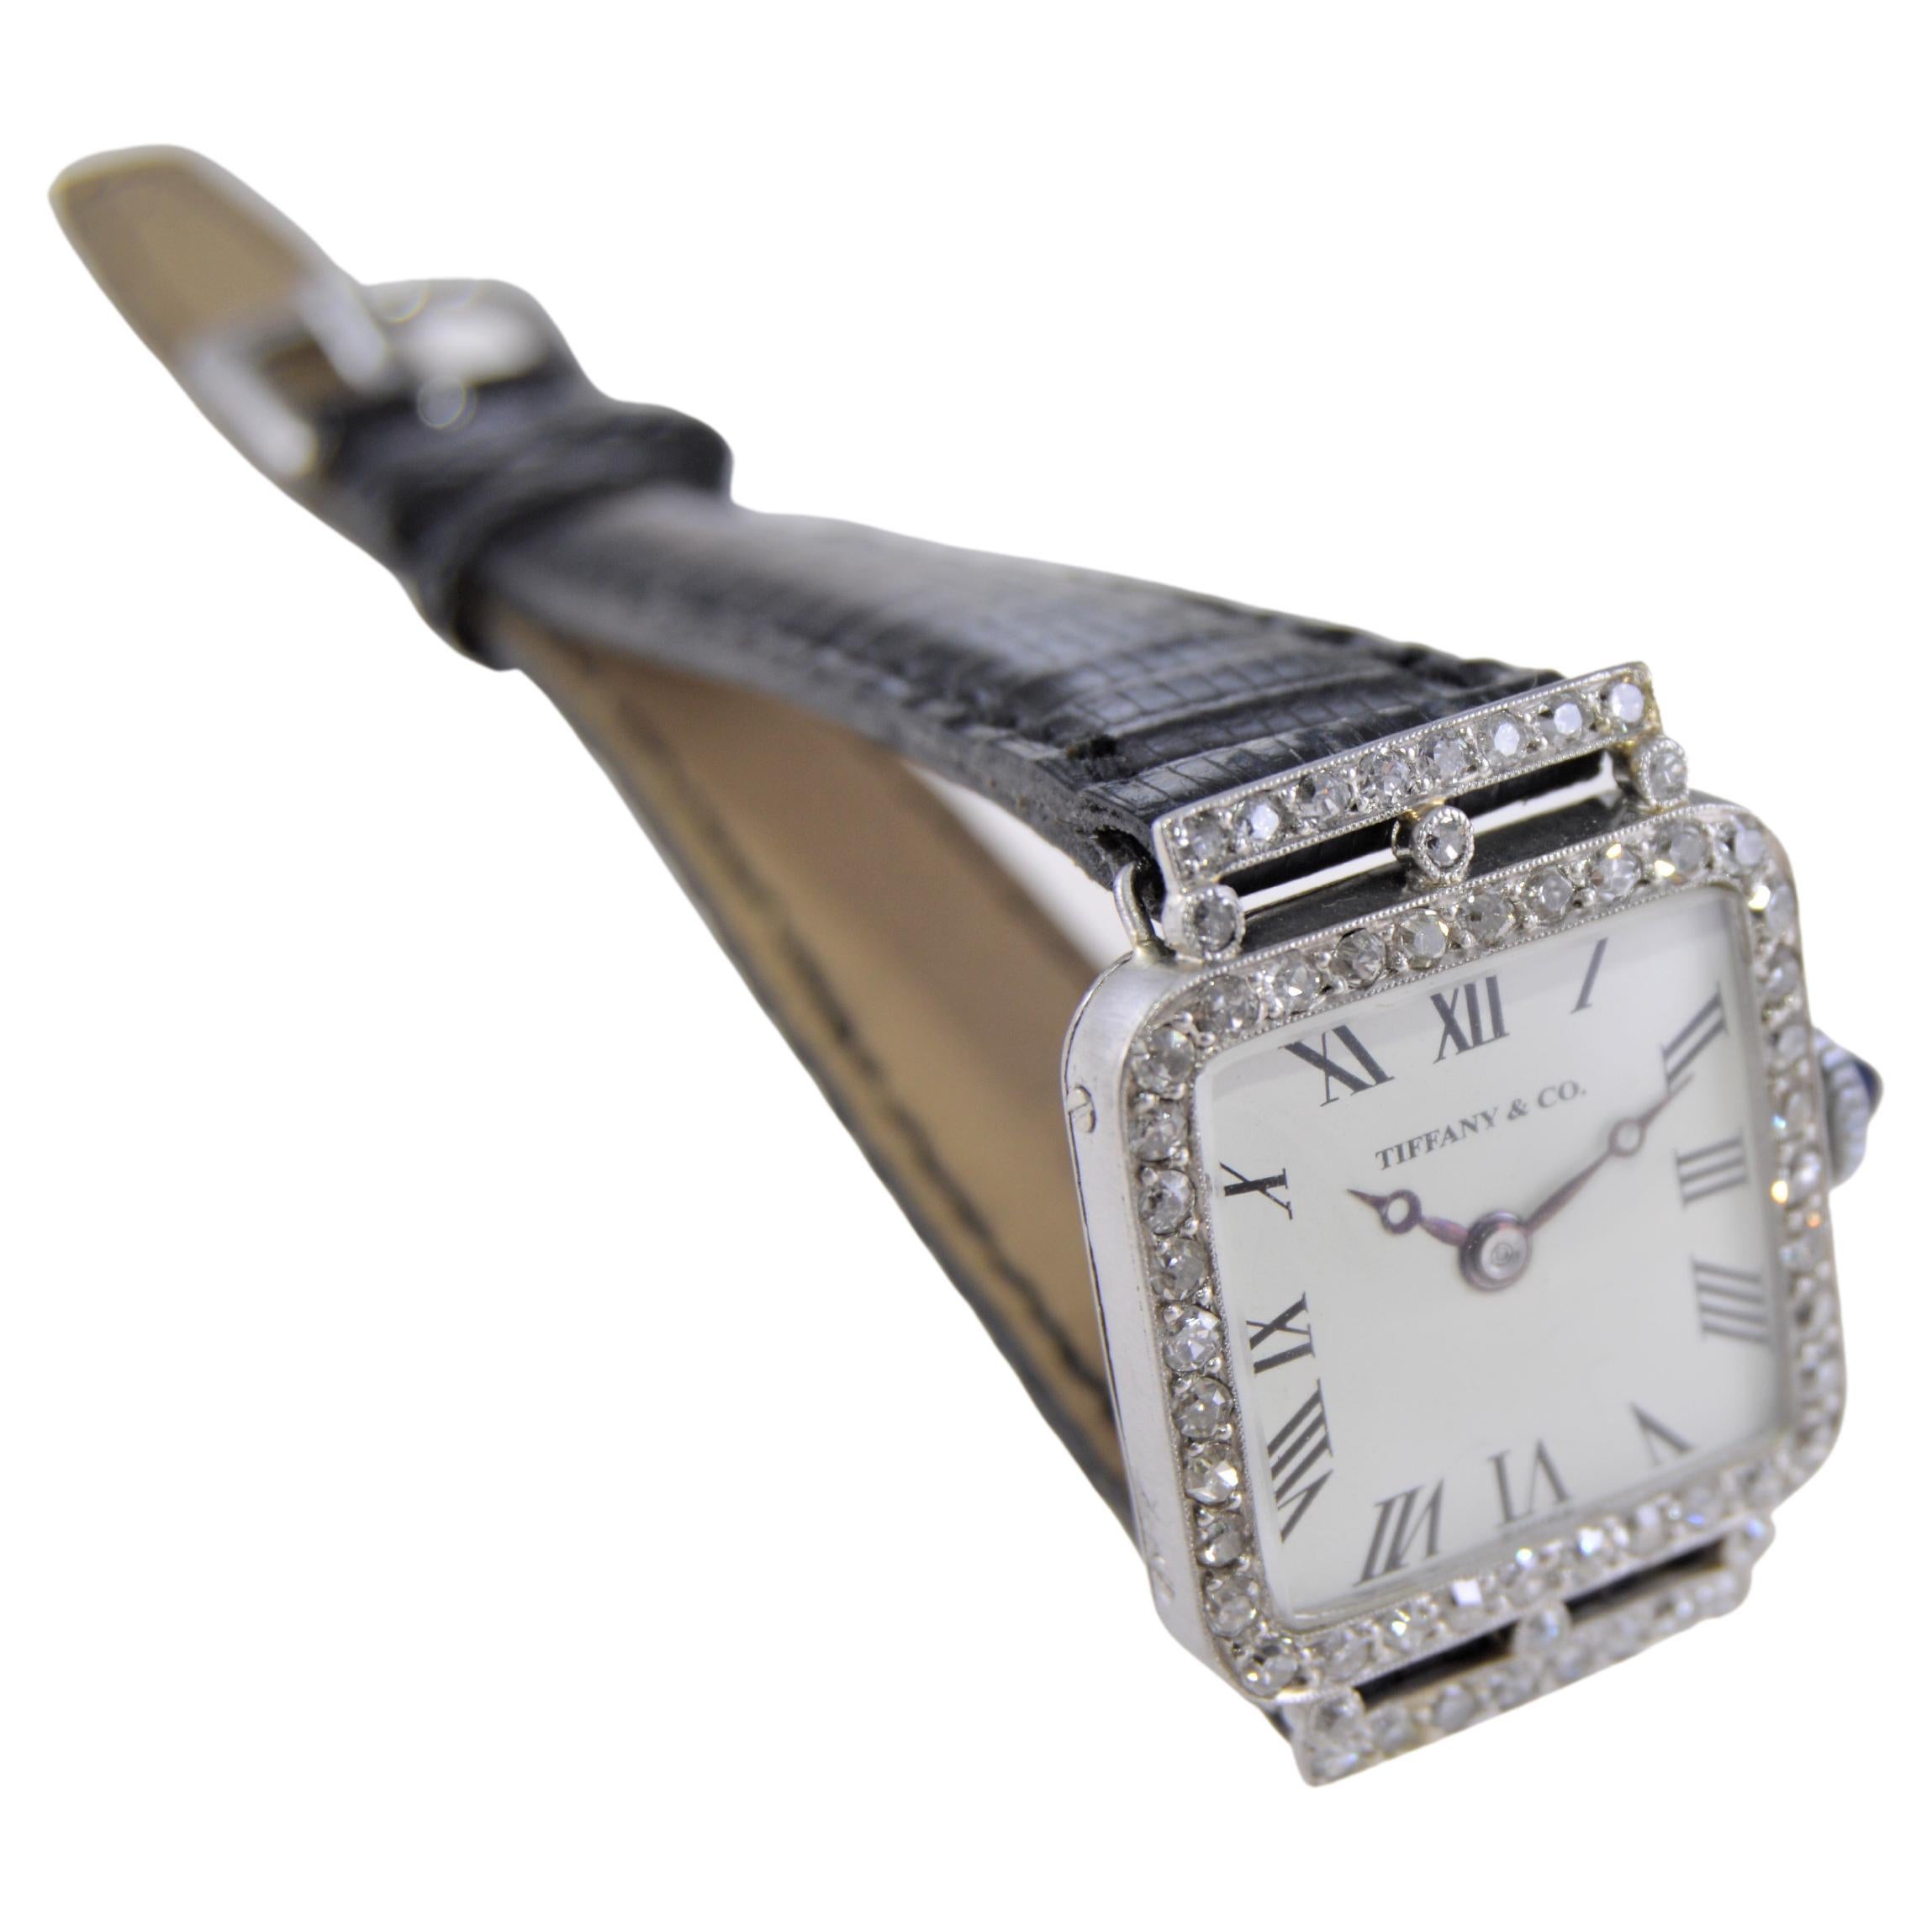 FACTORY / HOUSE: Tiffany & Co.
STYLE / REFERENCE: Art Deco / Dress Style 
METAL / MATERIAL: Platinum and Diamonds 
CIRCA / YEAR: 1920's
DIMENSIONS / SIZE: 30mm Length X 22mm Width
MOVEMENT / CALIBER: Manual Winding / 18 Jewels / Caliber High Grade